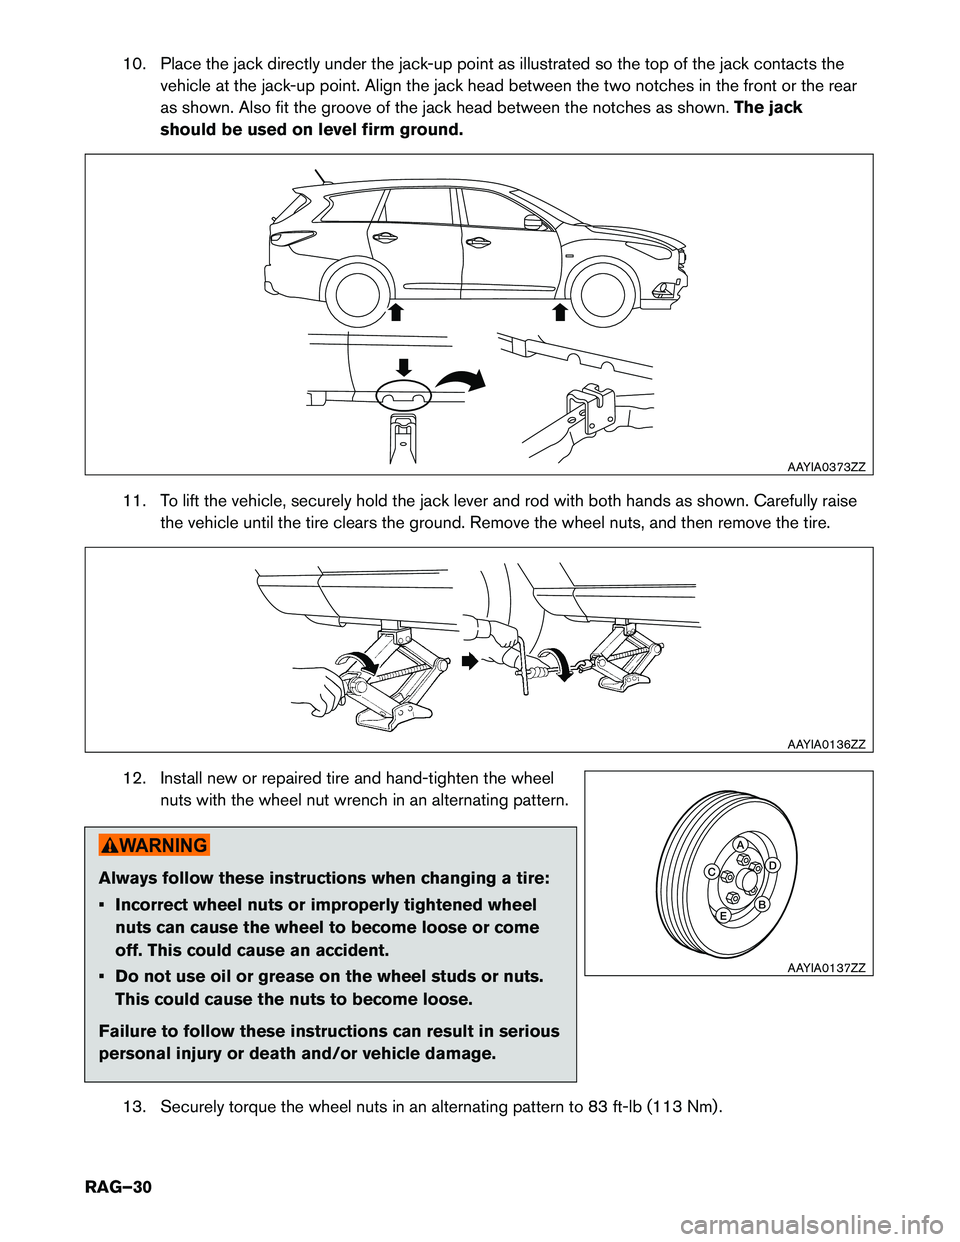 INFINITI QX60 HYBRID 2015  Roadside Assistance Guide 10. Place the jack directly under the jack-up point as illustrated so the top of the jack contacts thevehicle at the jack-up point. Align the jack head between the two notches in the front or the rear